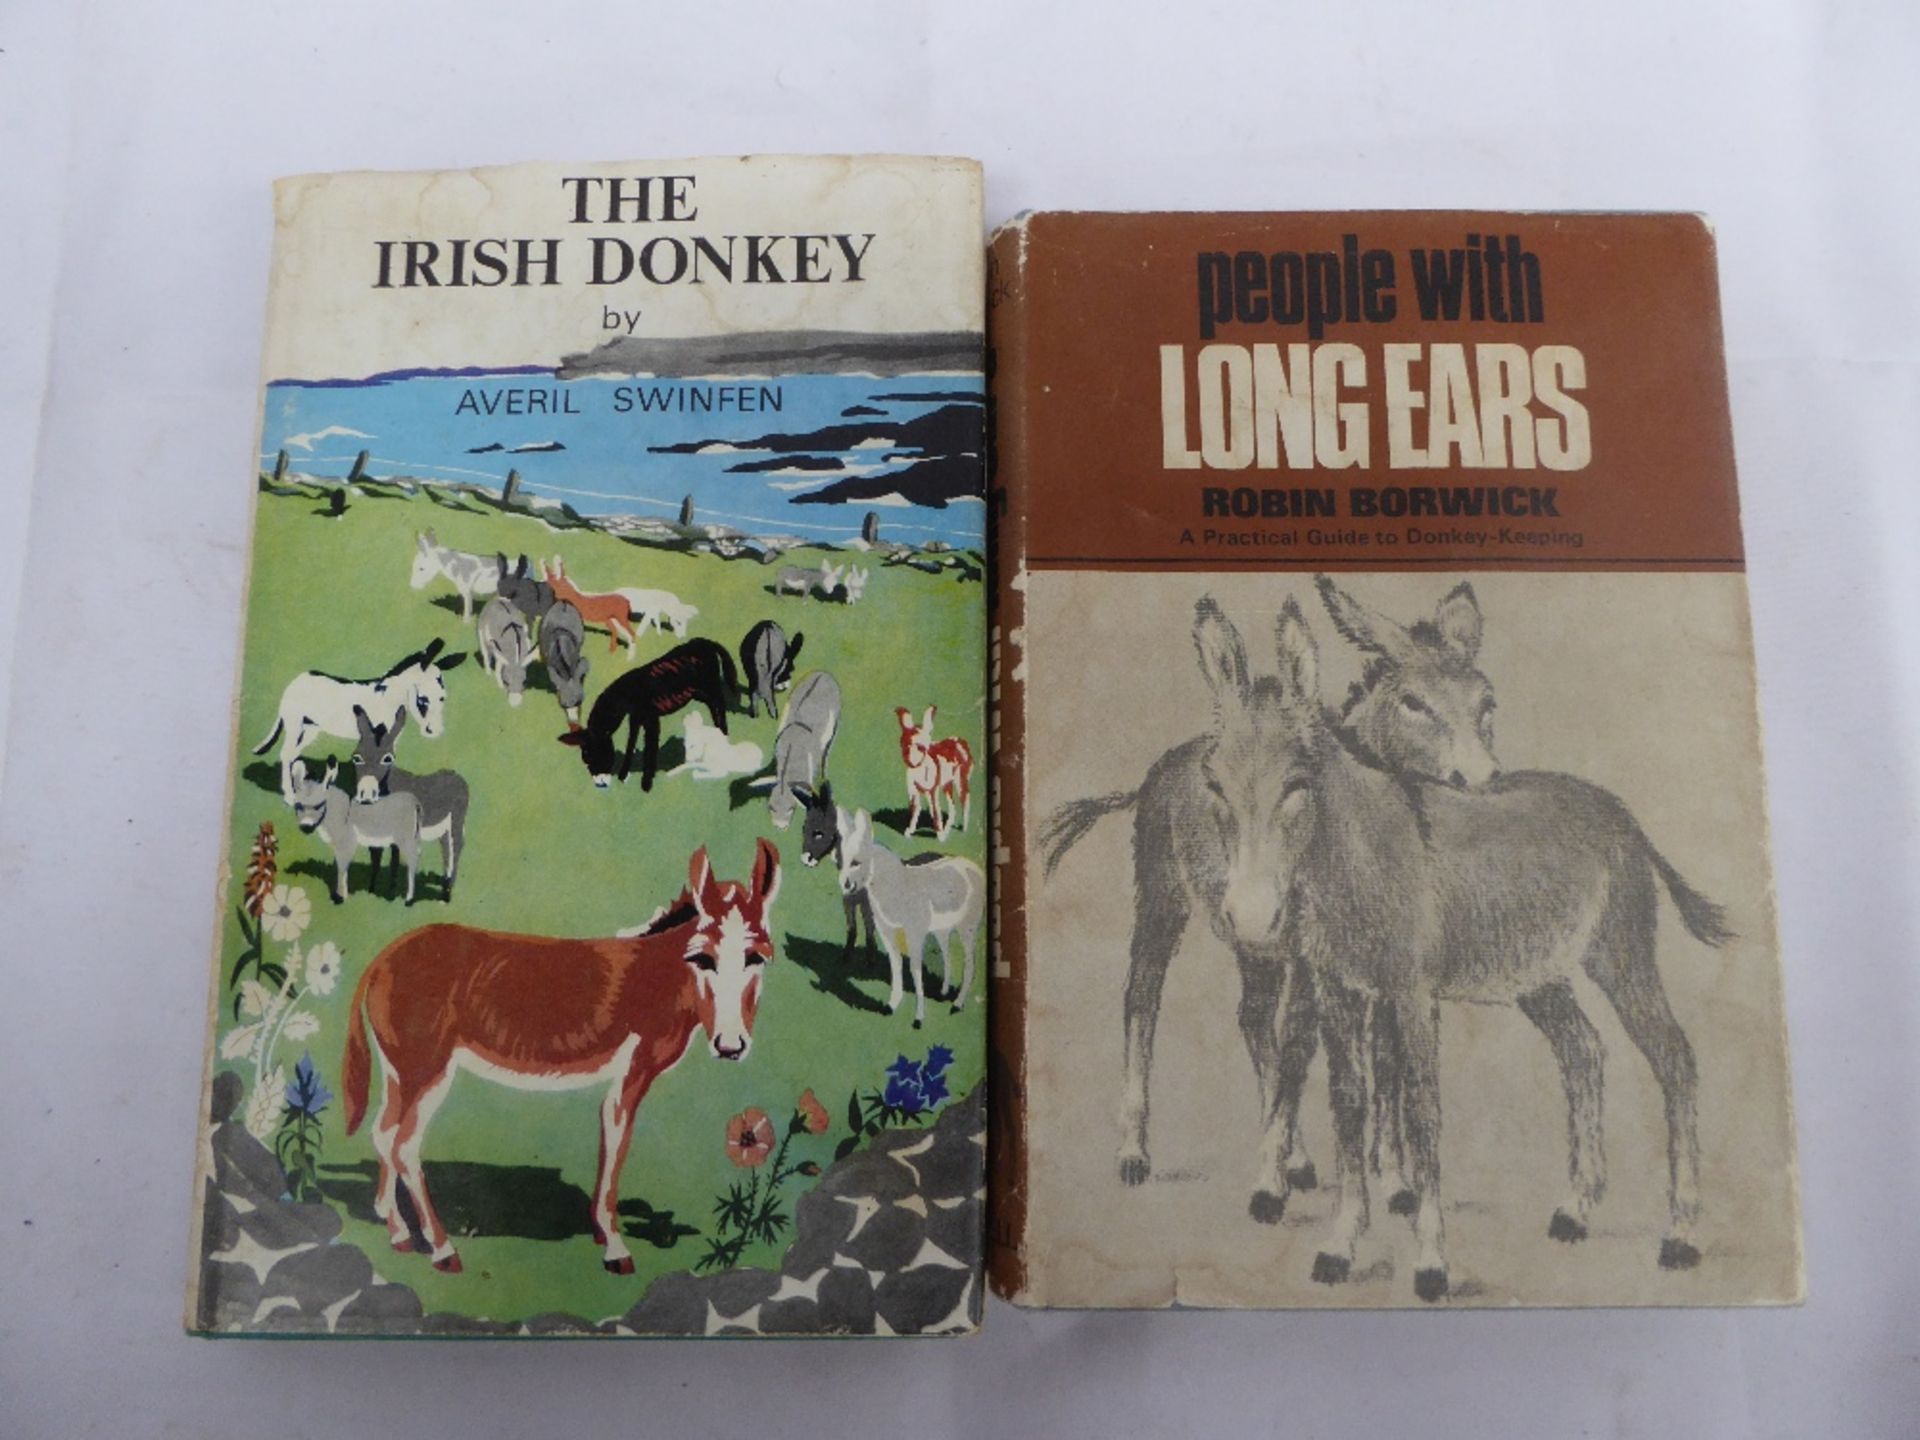 2 books - People with Long Ears by Robin Boreick and The Irish Donkey by Erik Swinfen